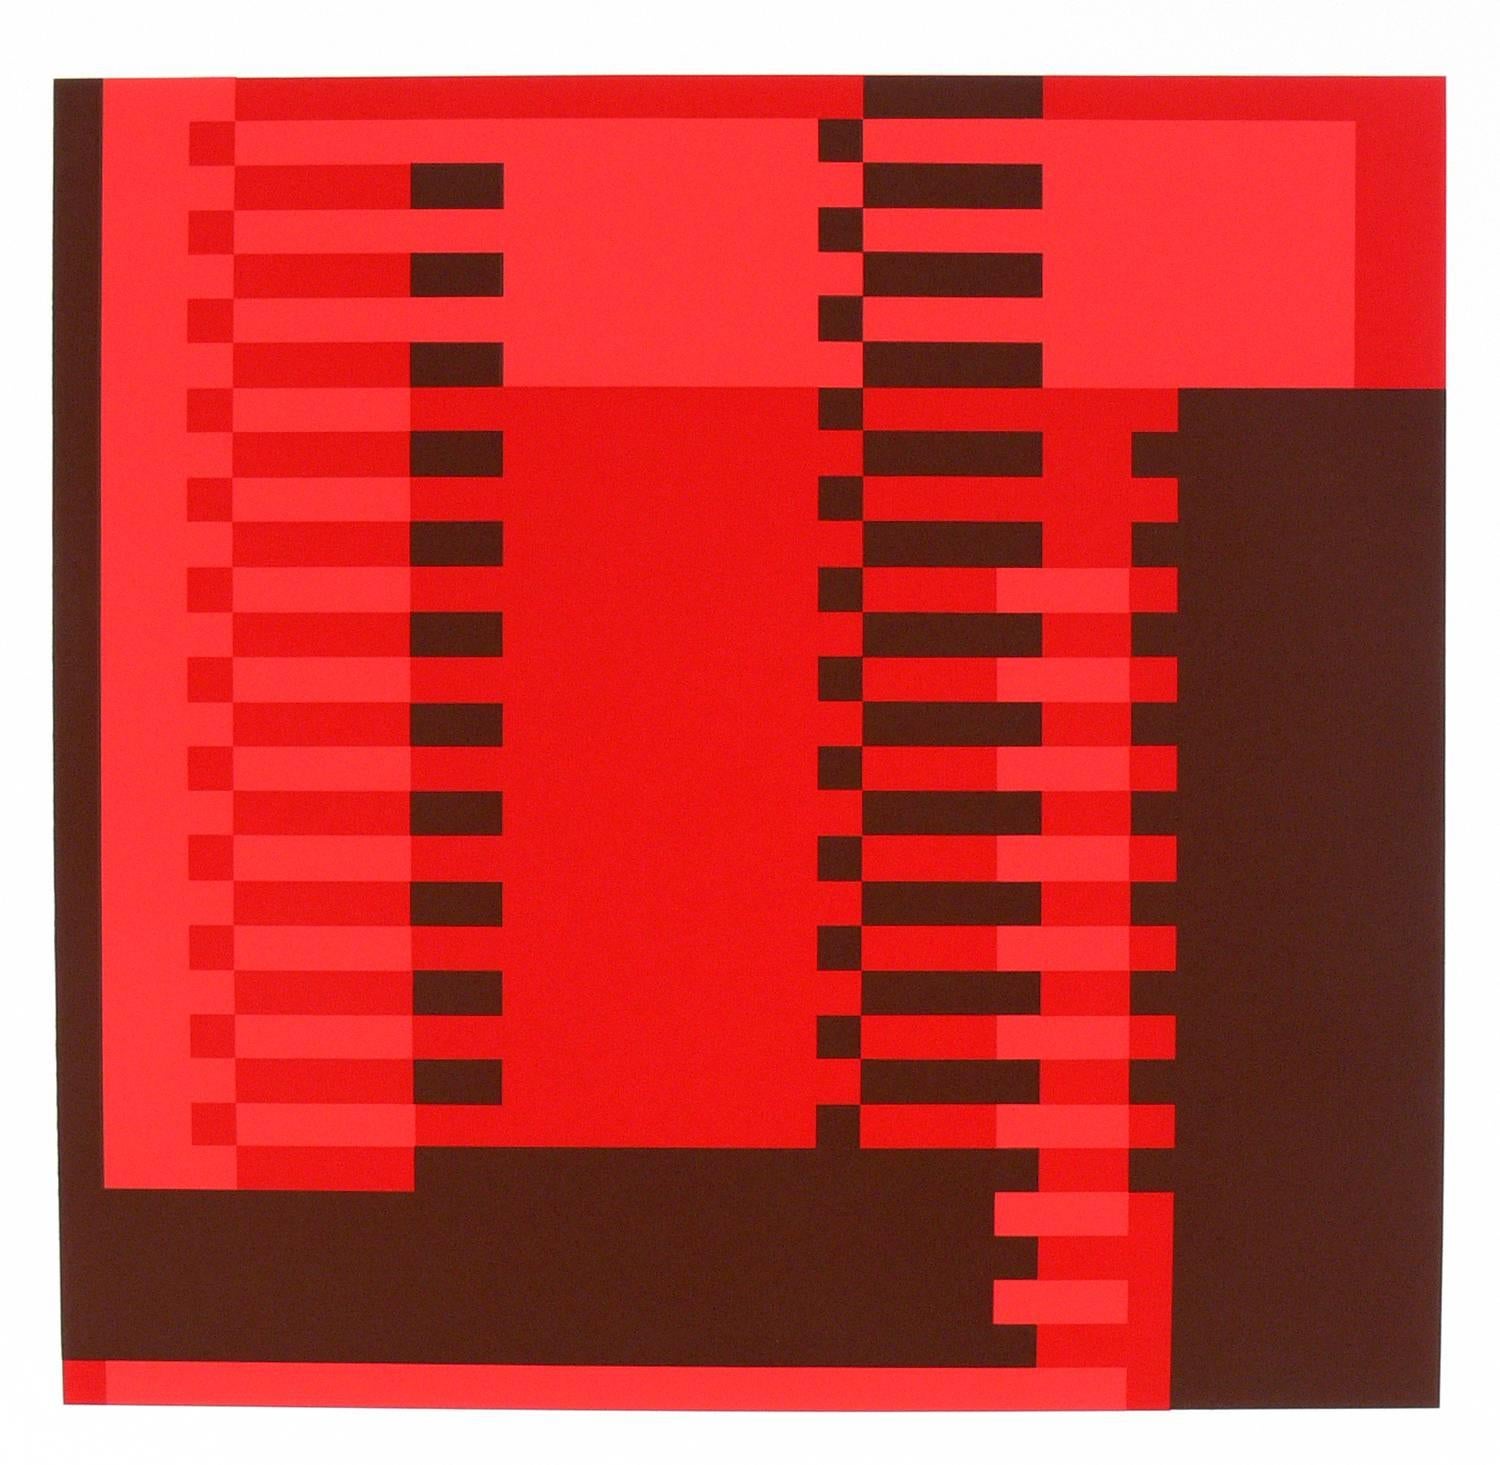 Josef Albers abstract lithograph from Formulation and Articulation, published by Harry N. Abrams Inc., New York, and Ives Sillman Inc., New Haven, circa 1972. This work is from Portfolio I, folder 22. It has been framed in a clean lined white